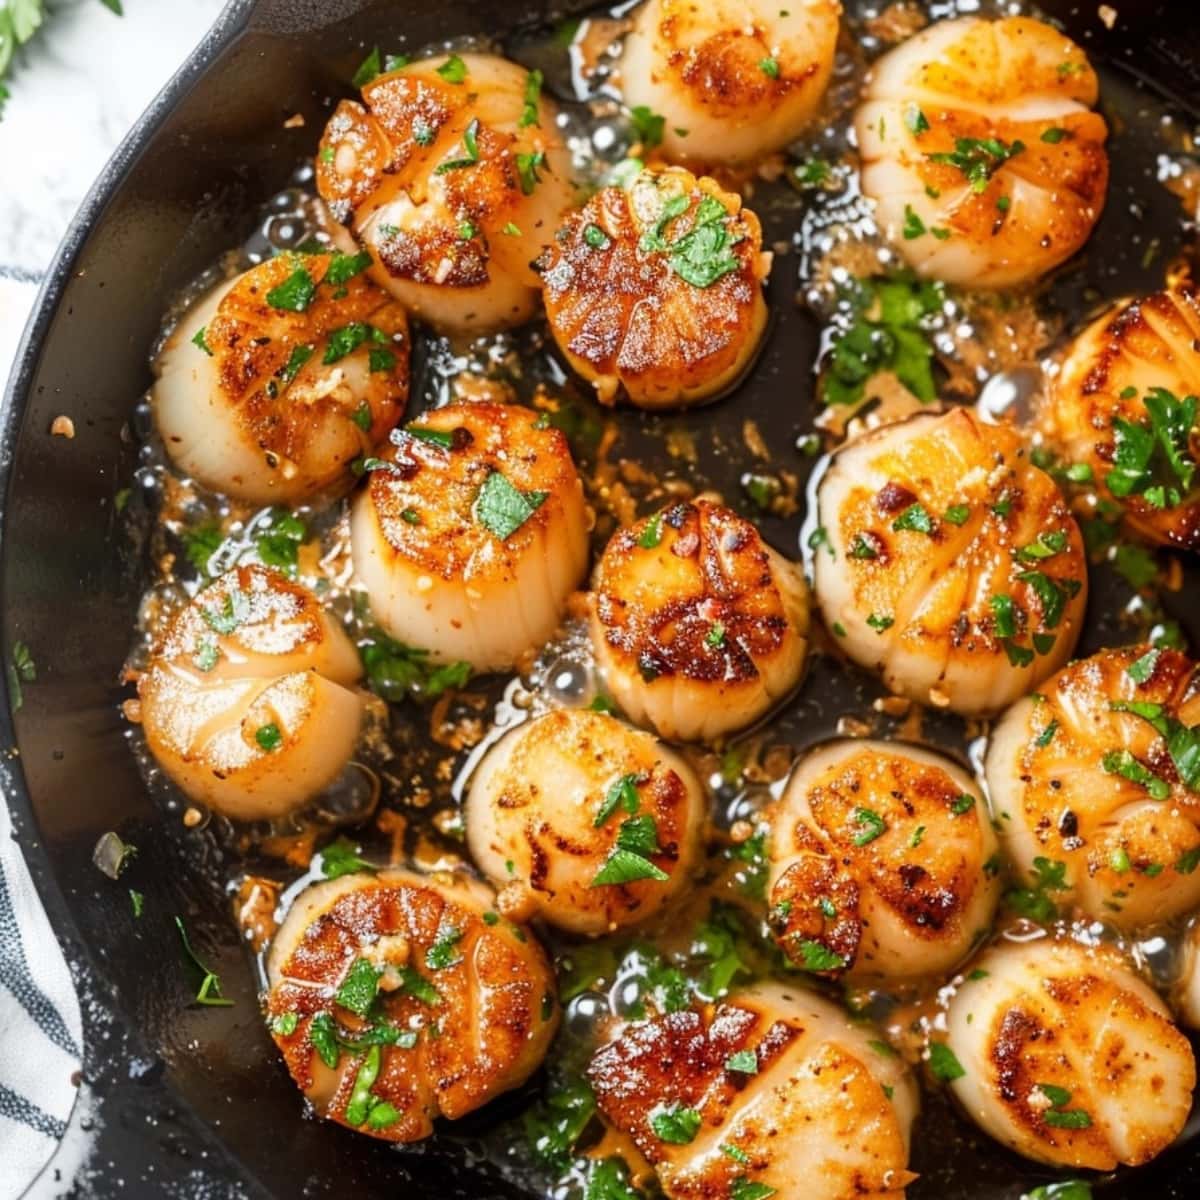 Air fried scallops tossed in garlic butter in cast iron skillet.